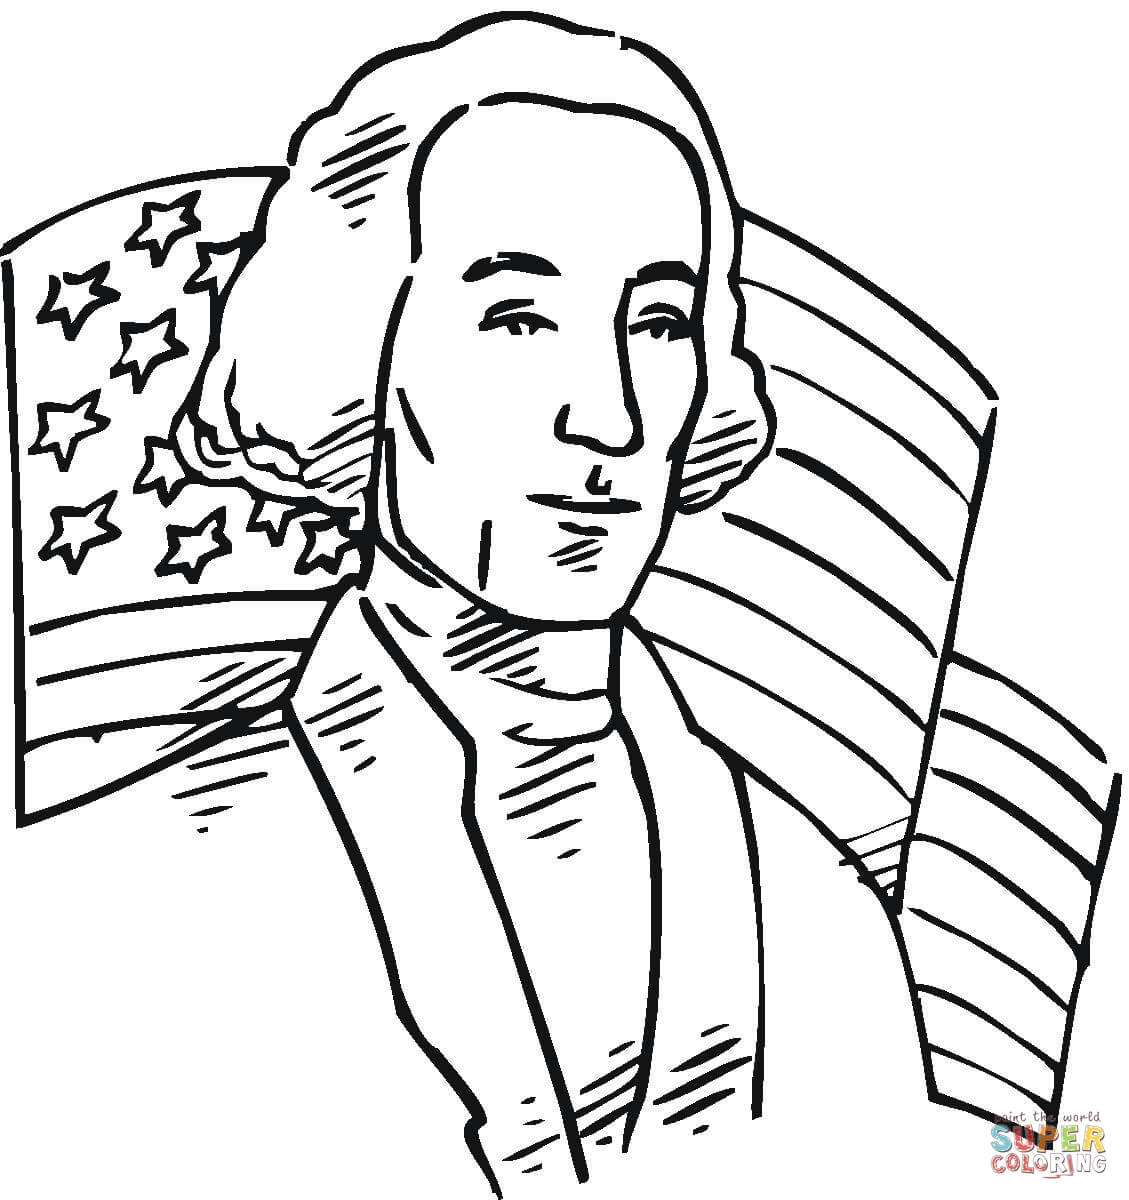 George Washington first president of the USA coloring page | Free ...